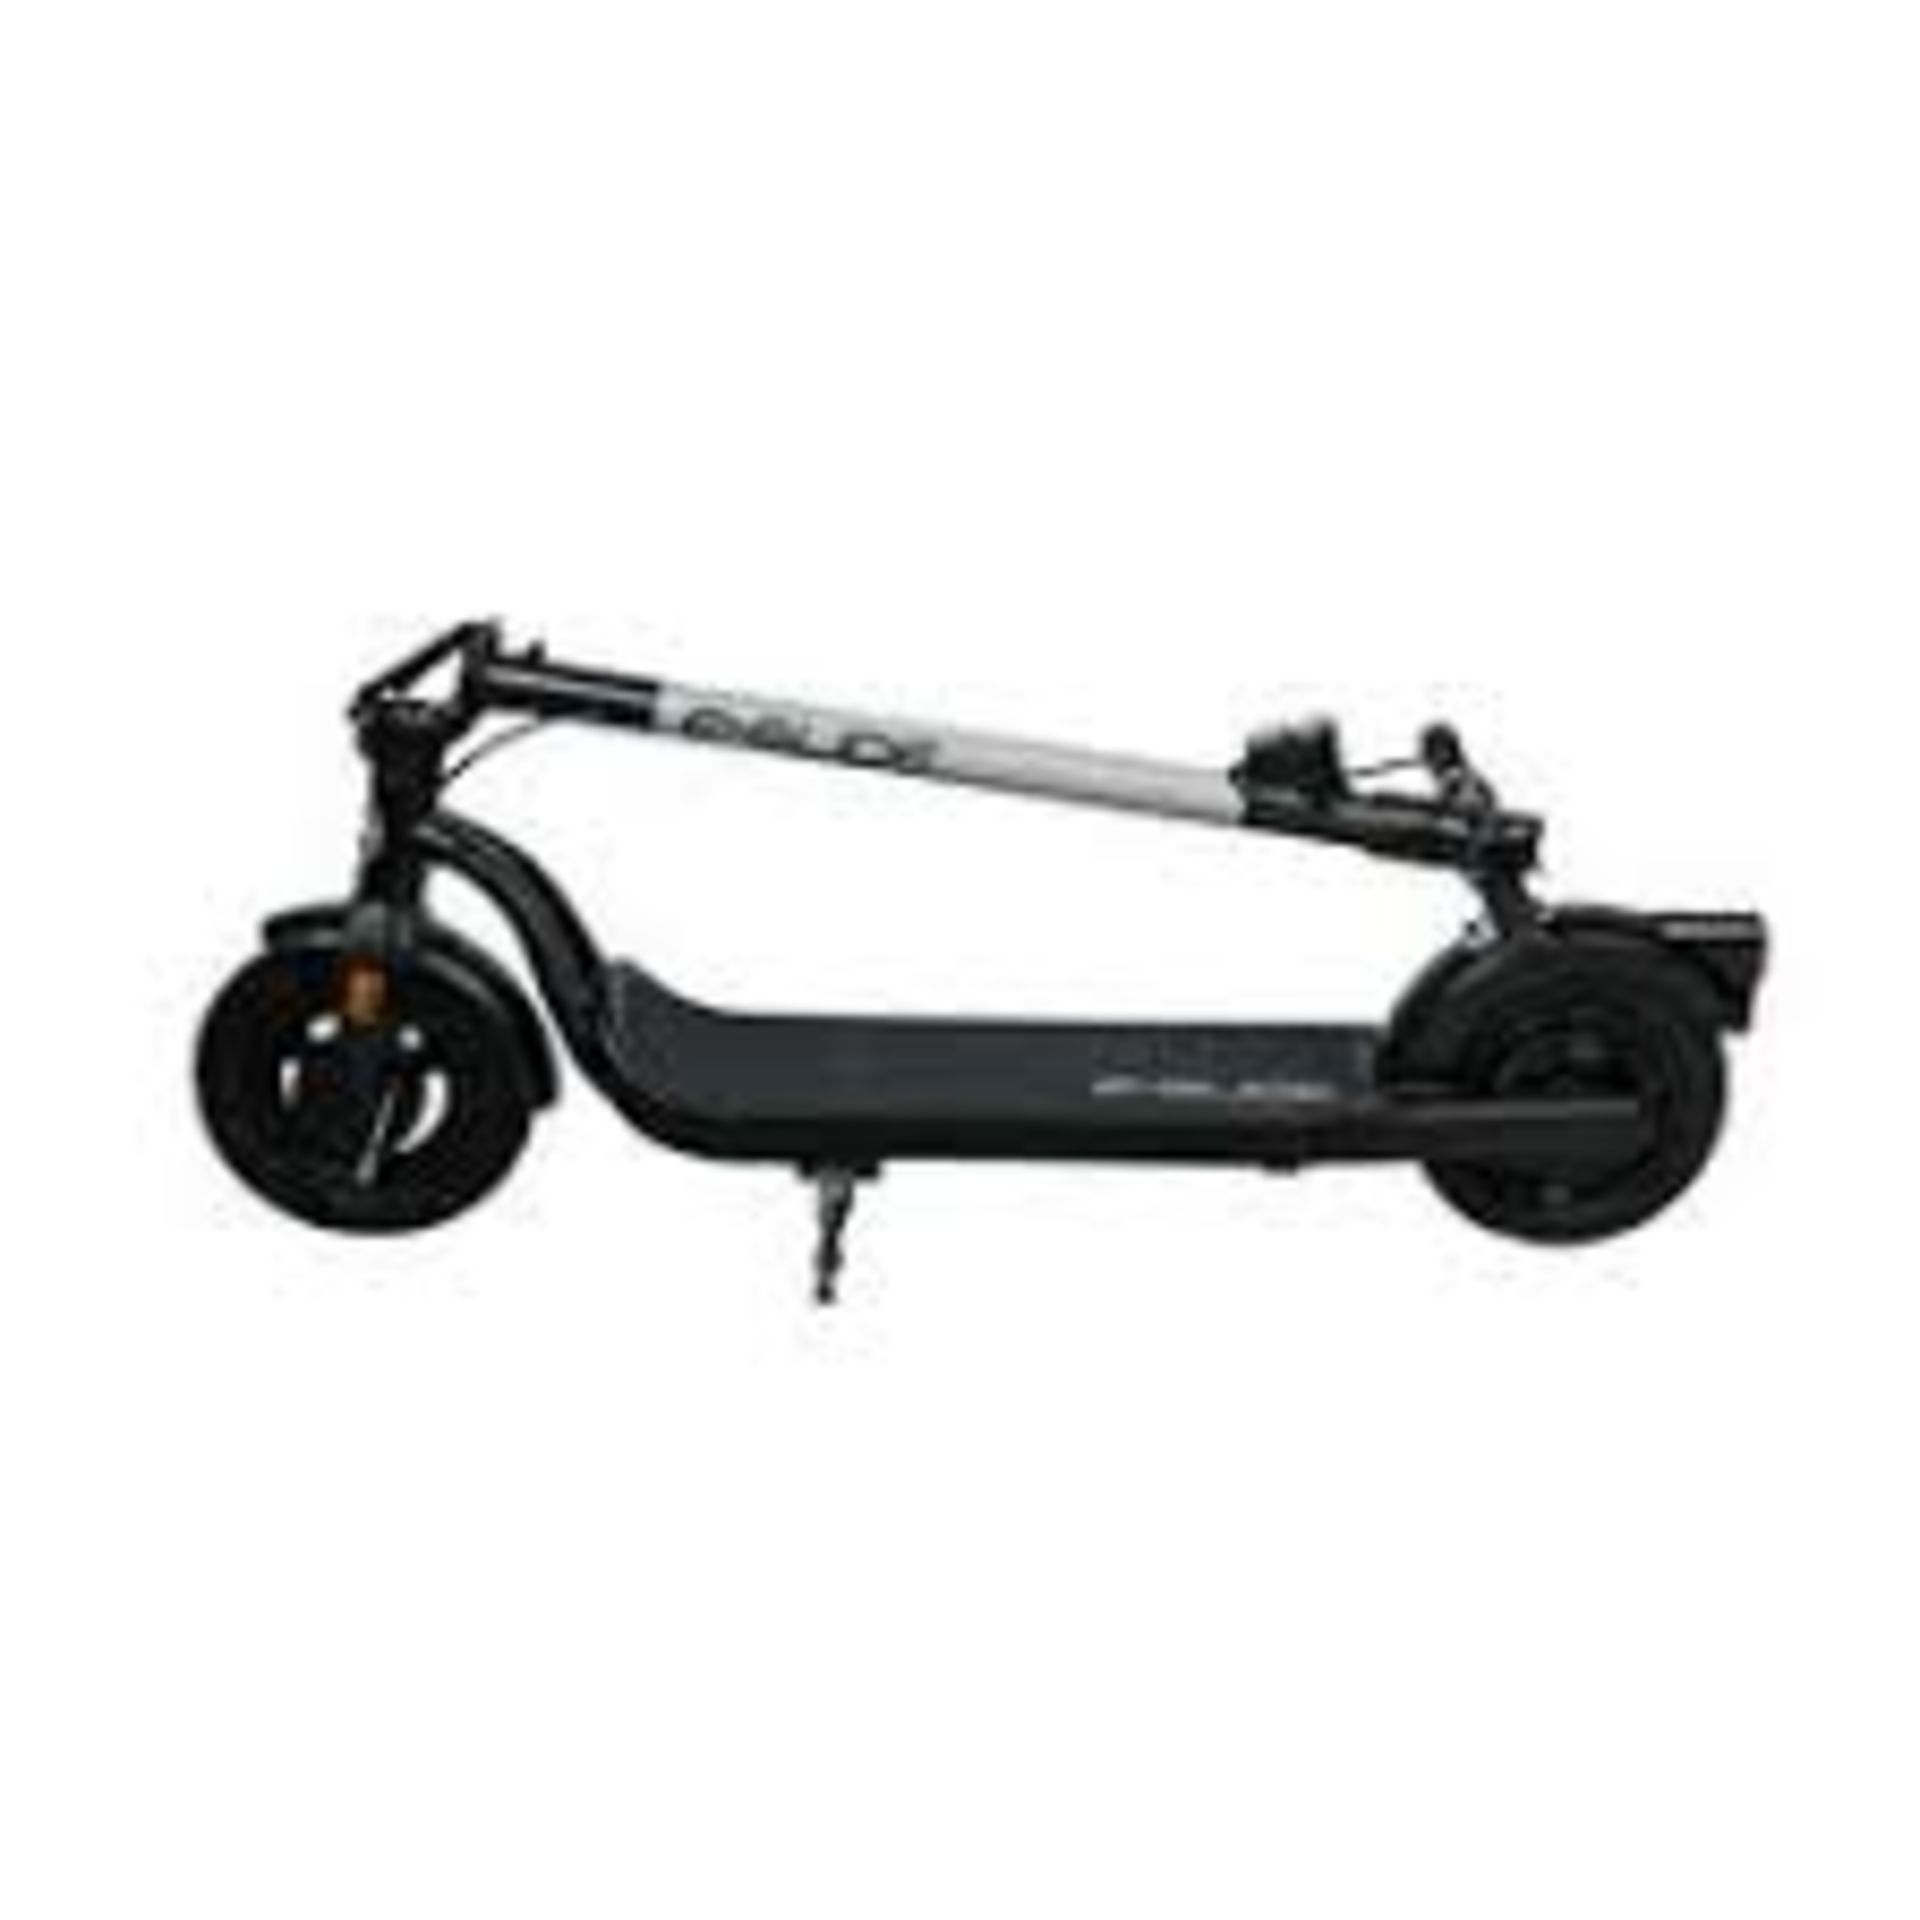 Brand New E-Glide V2 Electric Scooter Grey and Black RRP £599, Introducing a sleek and efficient - Image 2 of 3